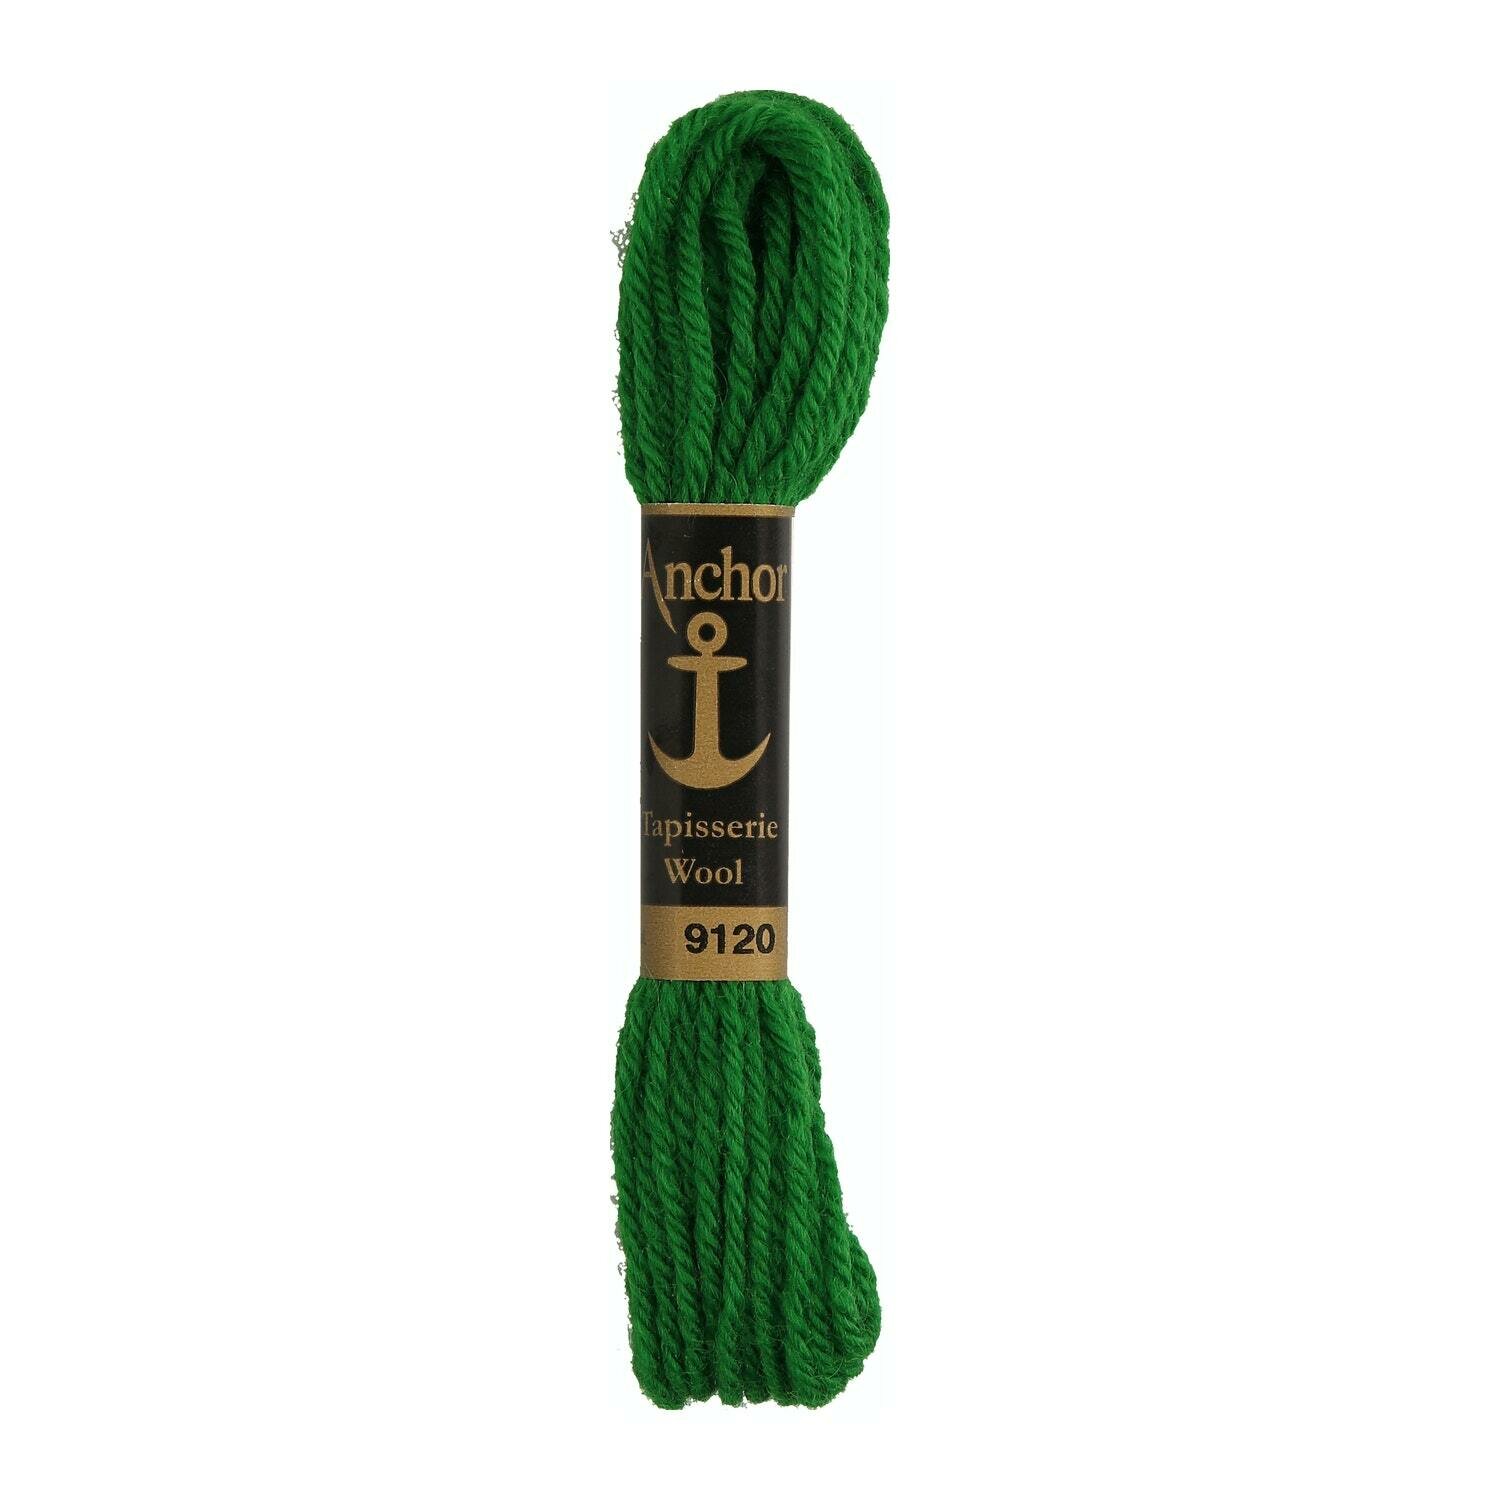 Anchor Tapisserie Wool # 09120